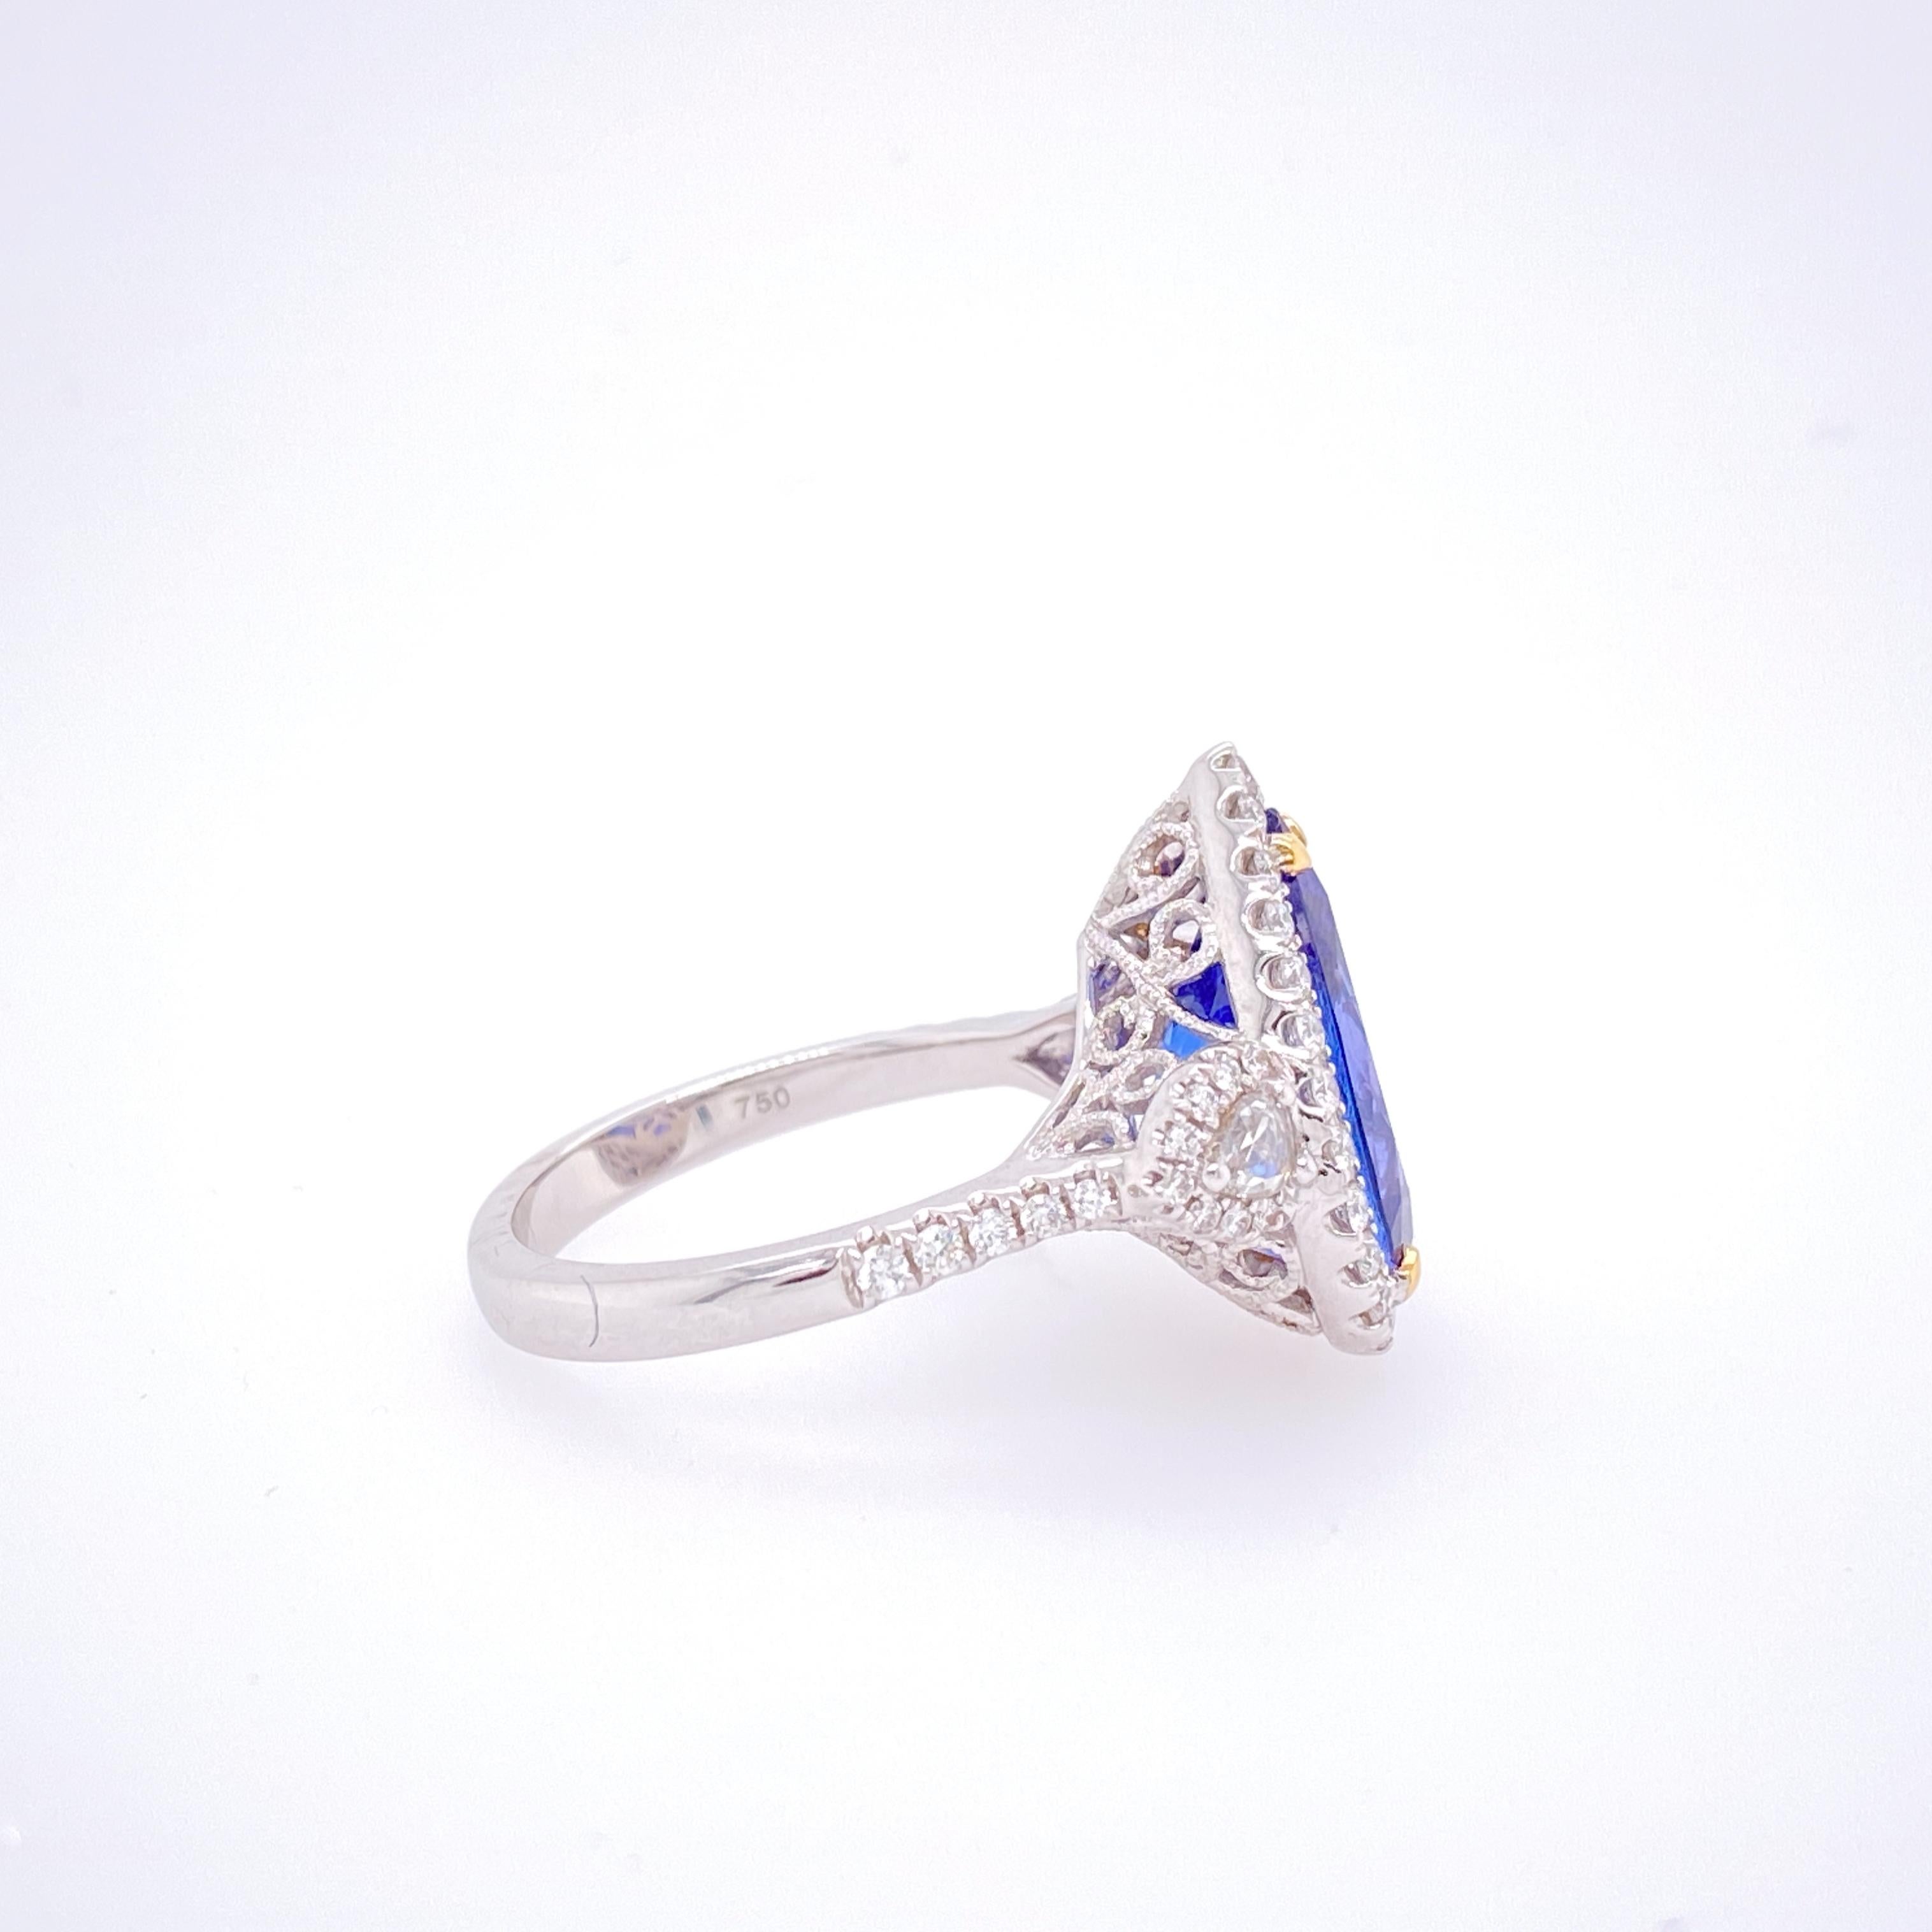 Women's 5.94 Carat Pear Shape Tanzanite and Diamond Ring For Sale